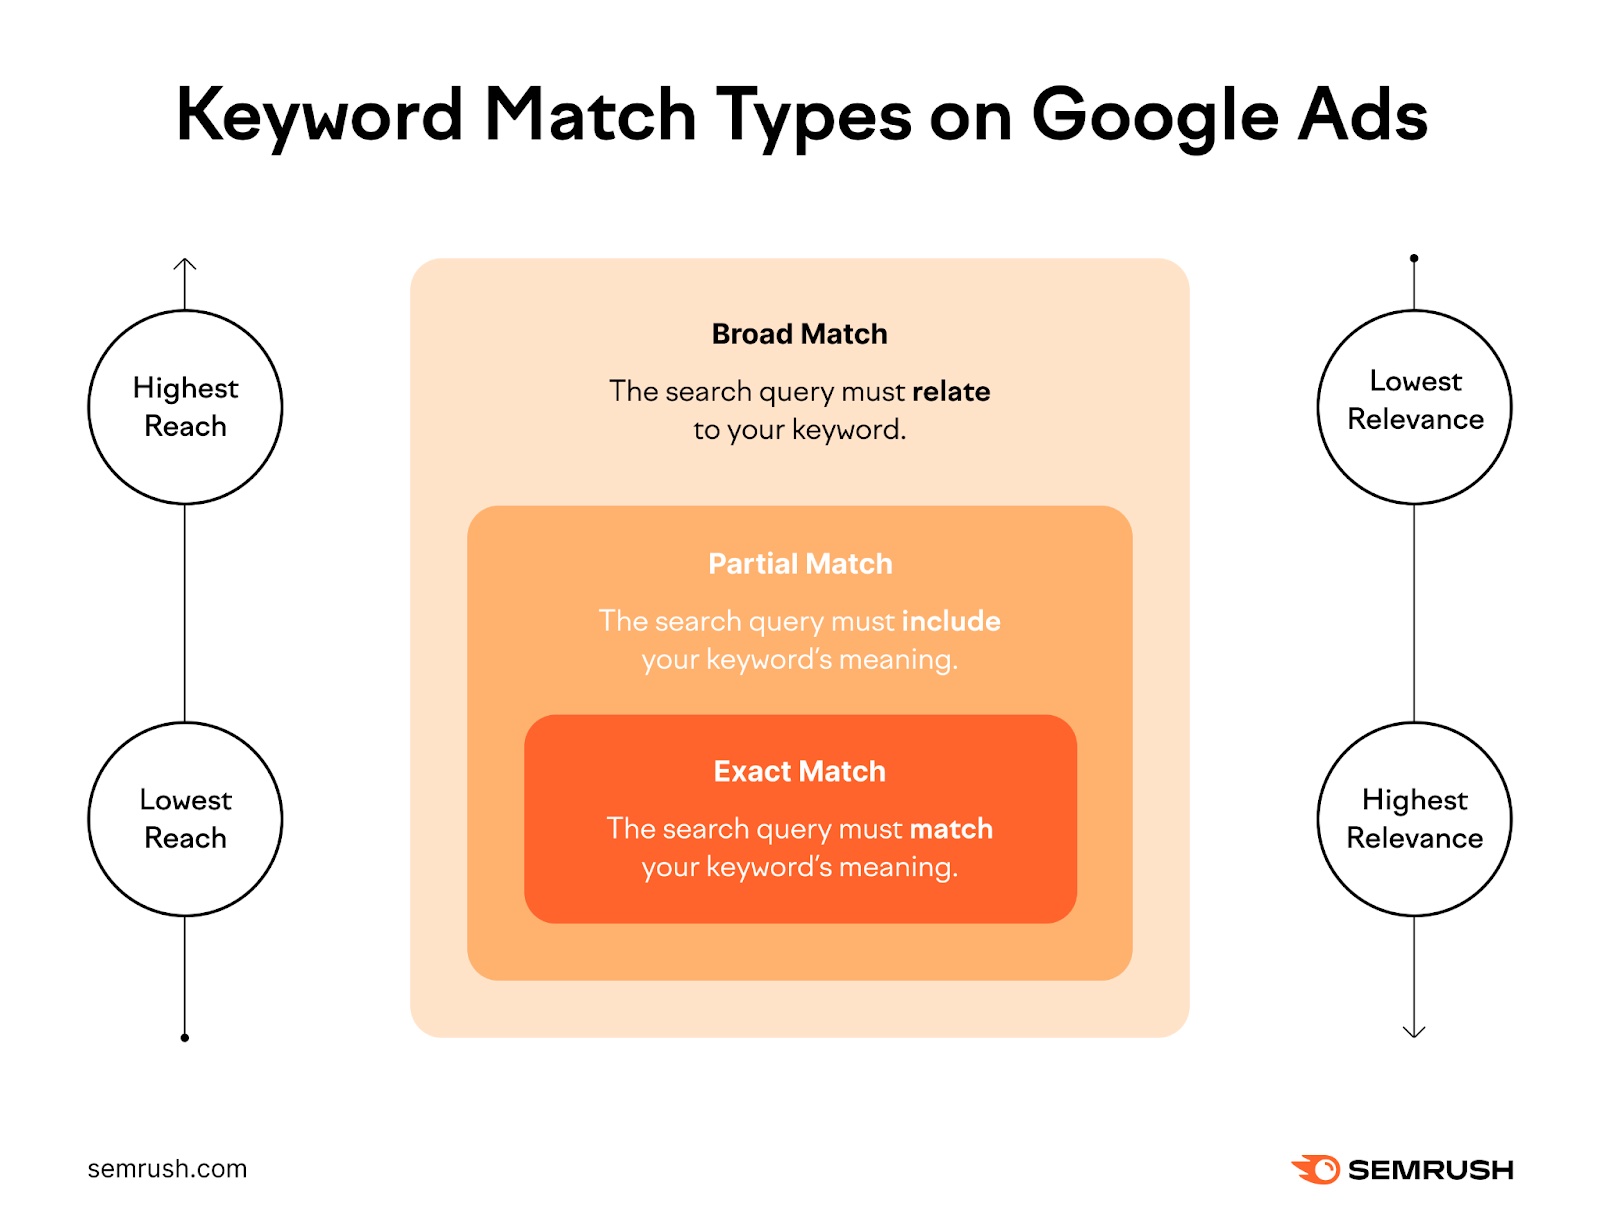 Keyword match types on Google Ads, illustrating broad match have highest reach but lowest relevance, exact match has lowest reach but highest relevance, and partial match has reach and relevance somewhere in between.